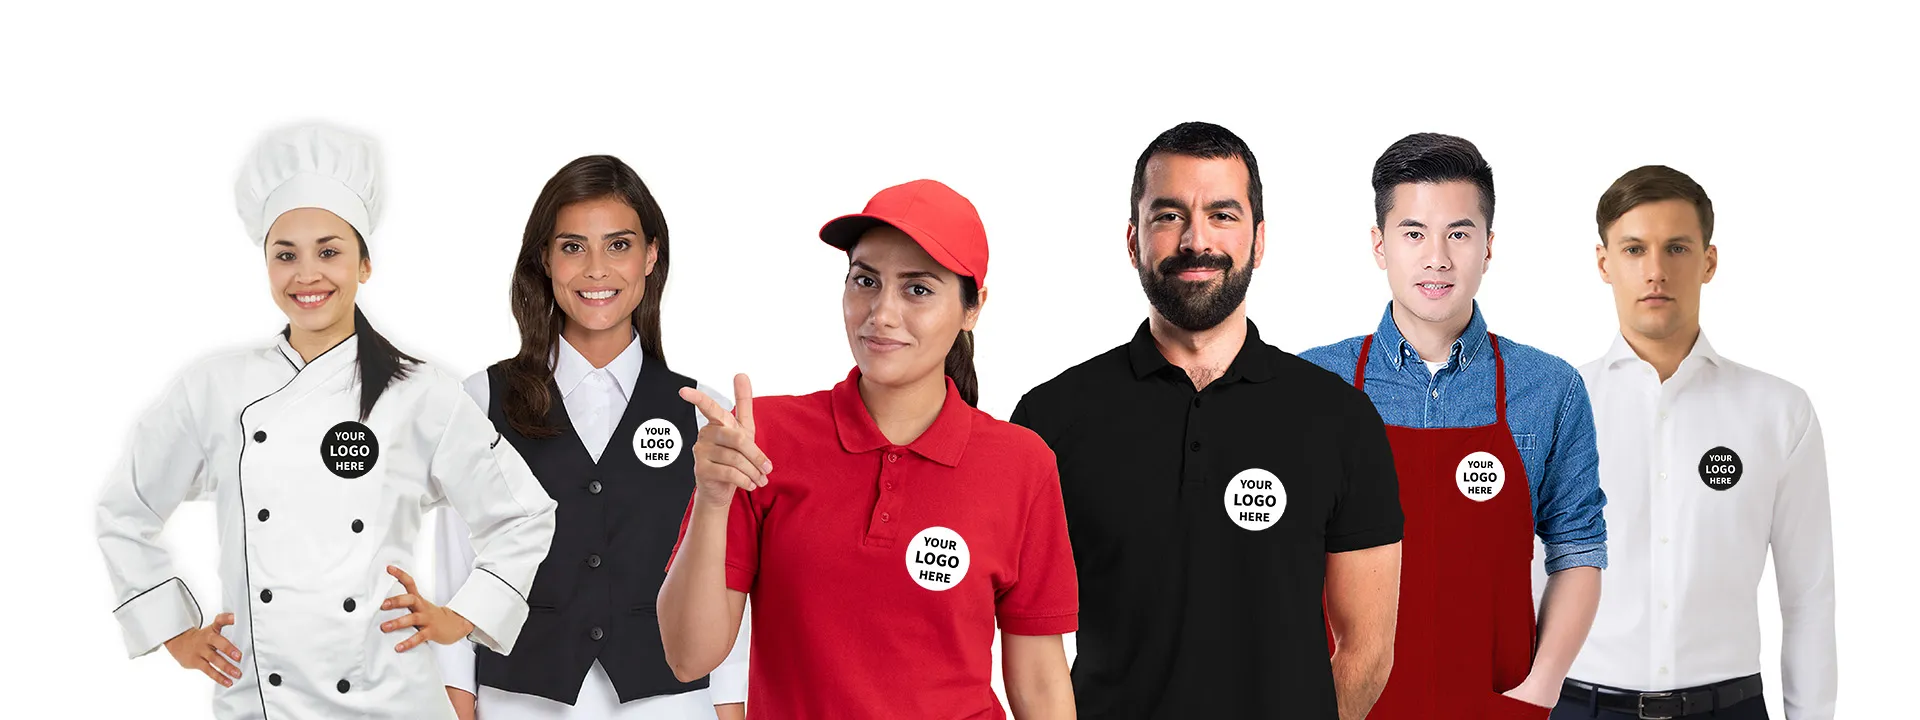 benefits of wearing work uniforms for your business frankybros fashion corporate uniform manufacturer in india